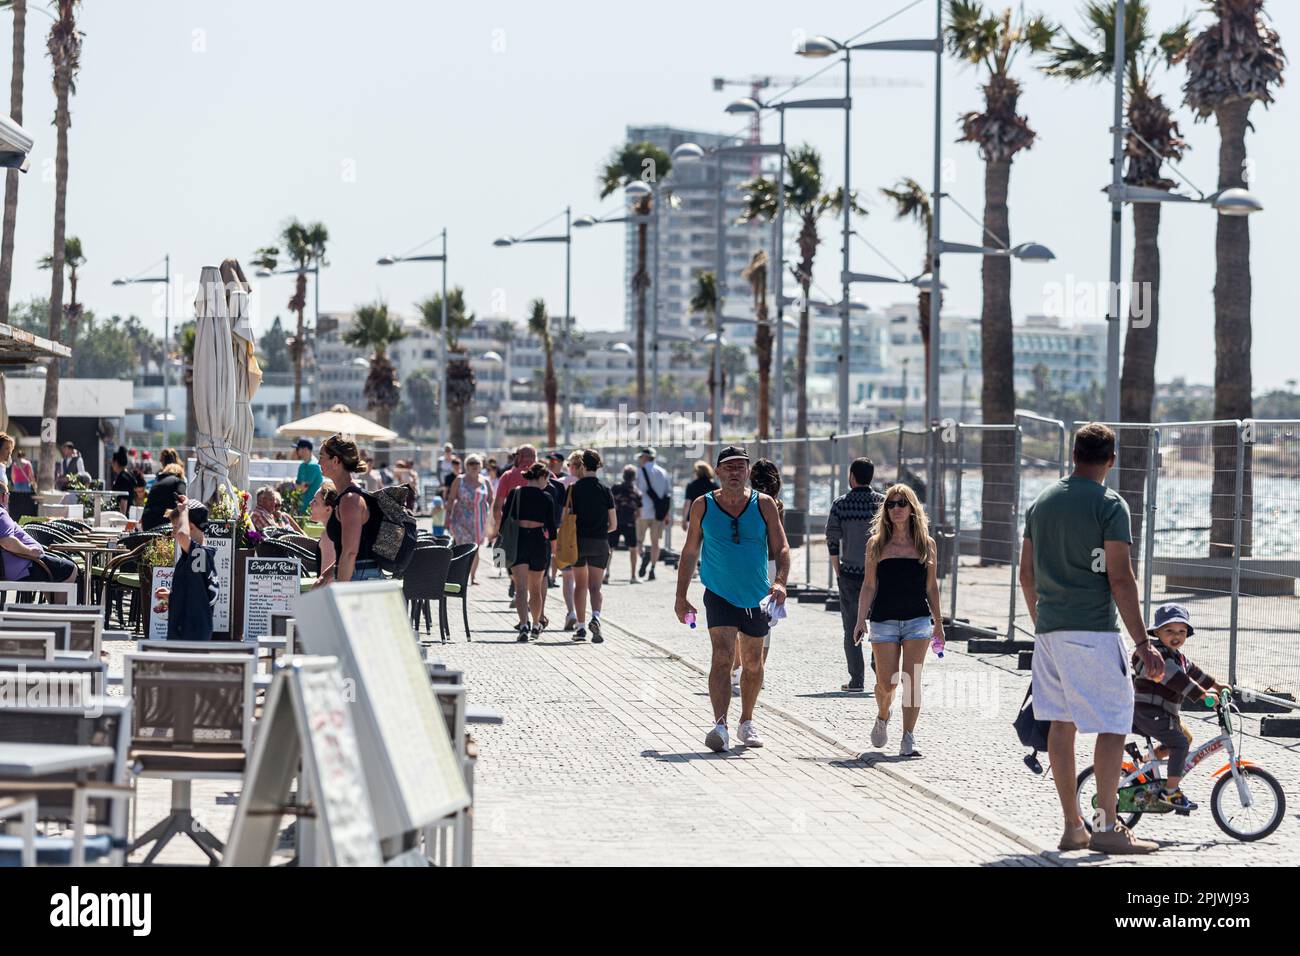 April 4, 2023, Paphos, Paphos, Cyprus: Tourists walk on the road next to the beach in Paphos. Cyprus sees massive increase in tourist arrivals in February with UK topping the list. Tourist arrivals in Cyprus increased by 65.6% year-on-year in February 2023. This fact, combined with the facts that Cyprus welcomed 3.2 million tourists last year, despite the absence of 800,000 Russian and Ukrainian tourists because of the war and that for 2022 it is estimated that tourists' spending has increased by about 13% on average for each trip, makes 2023 seem very promising. (Credit Image: © Kostas Pikoul Stock Photo